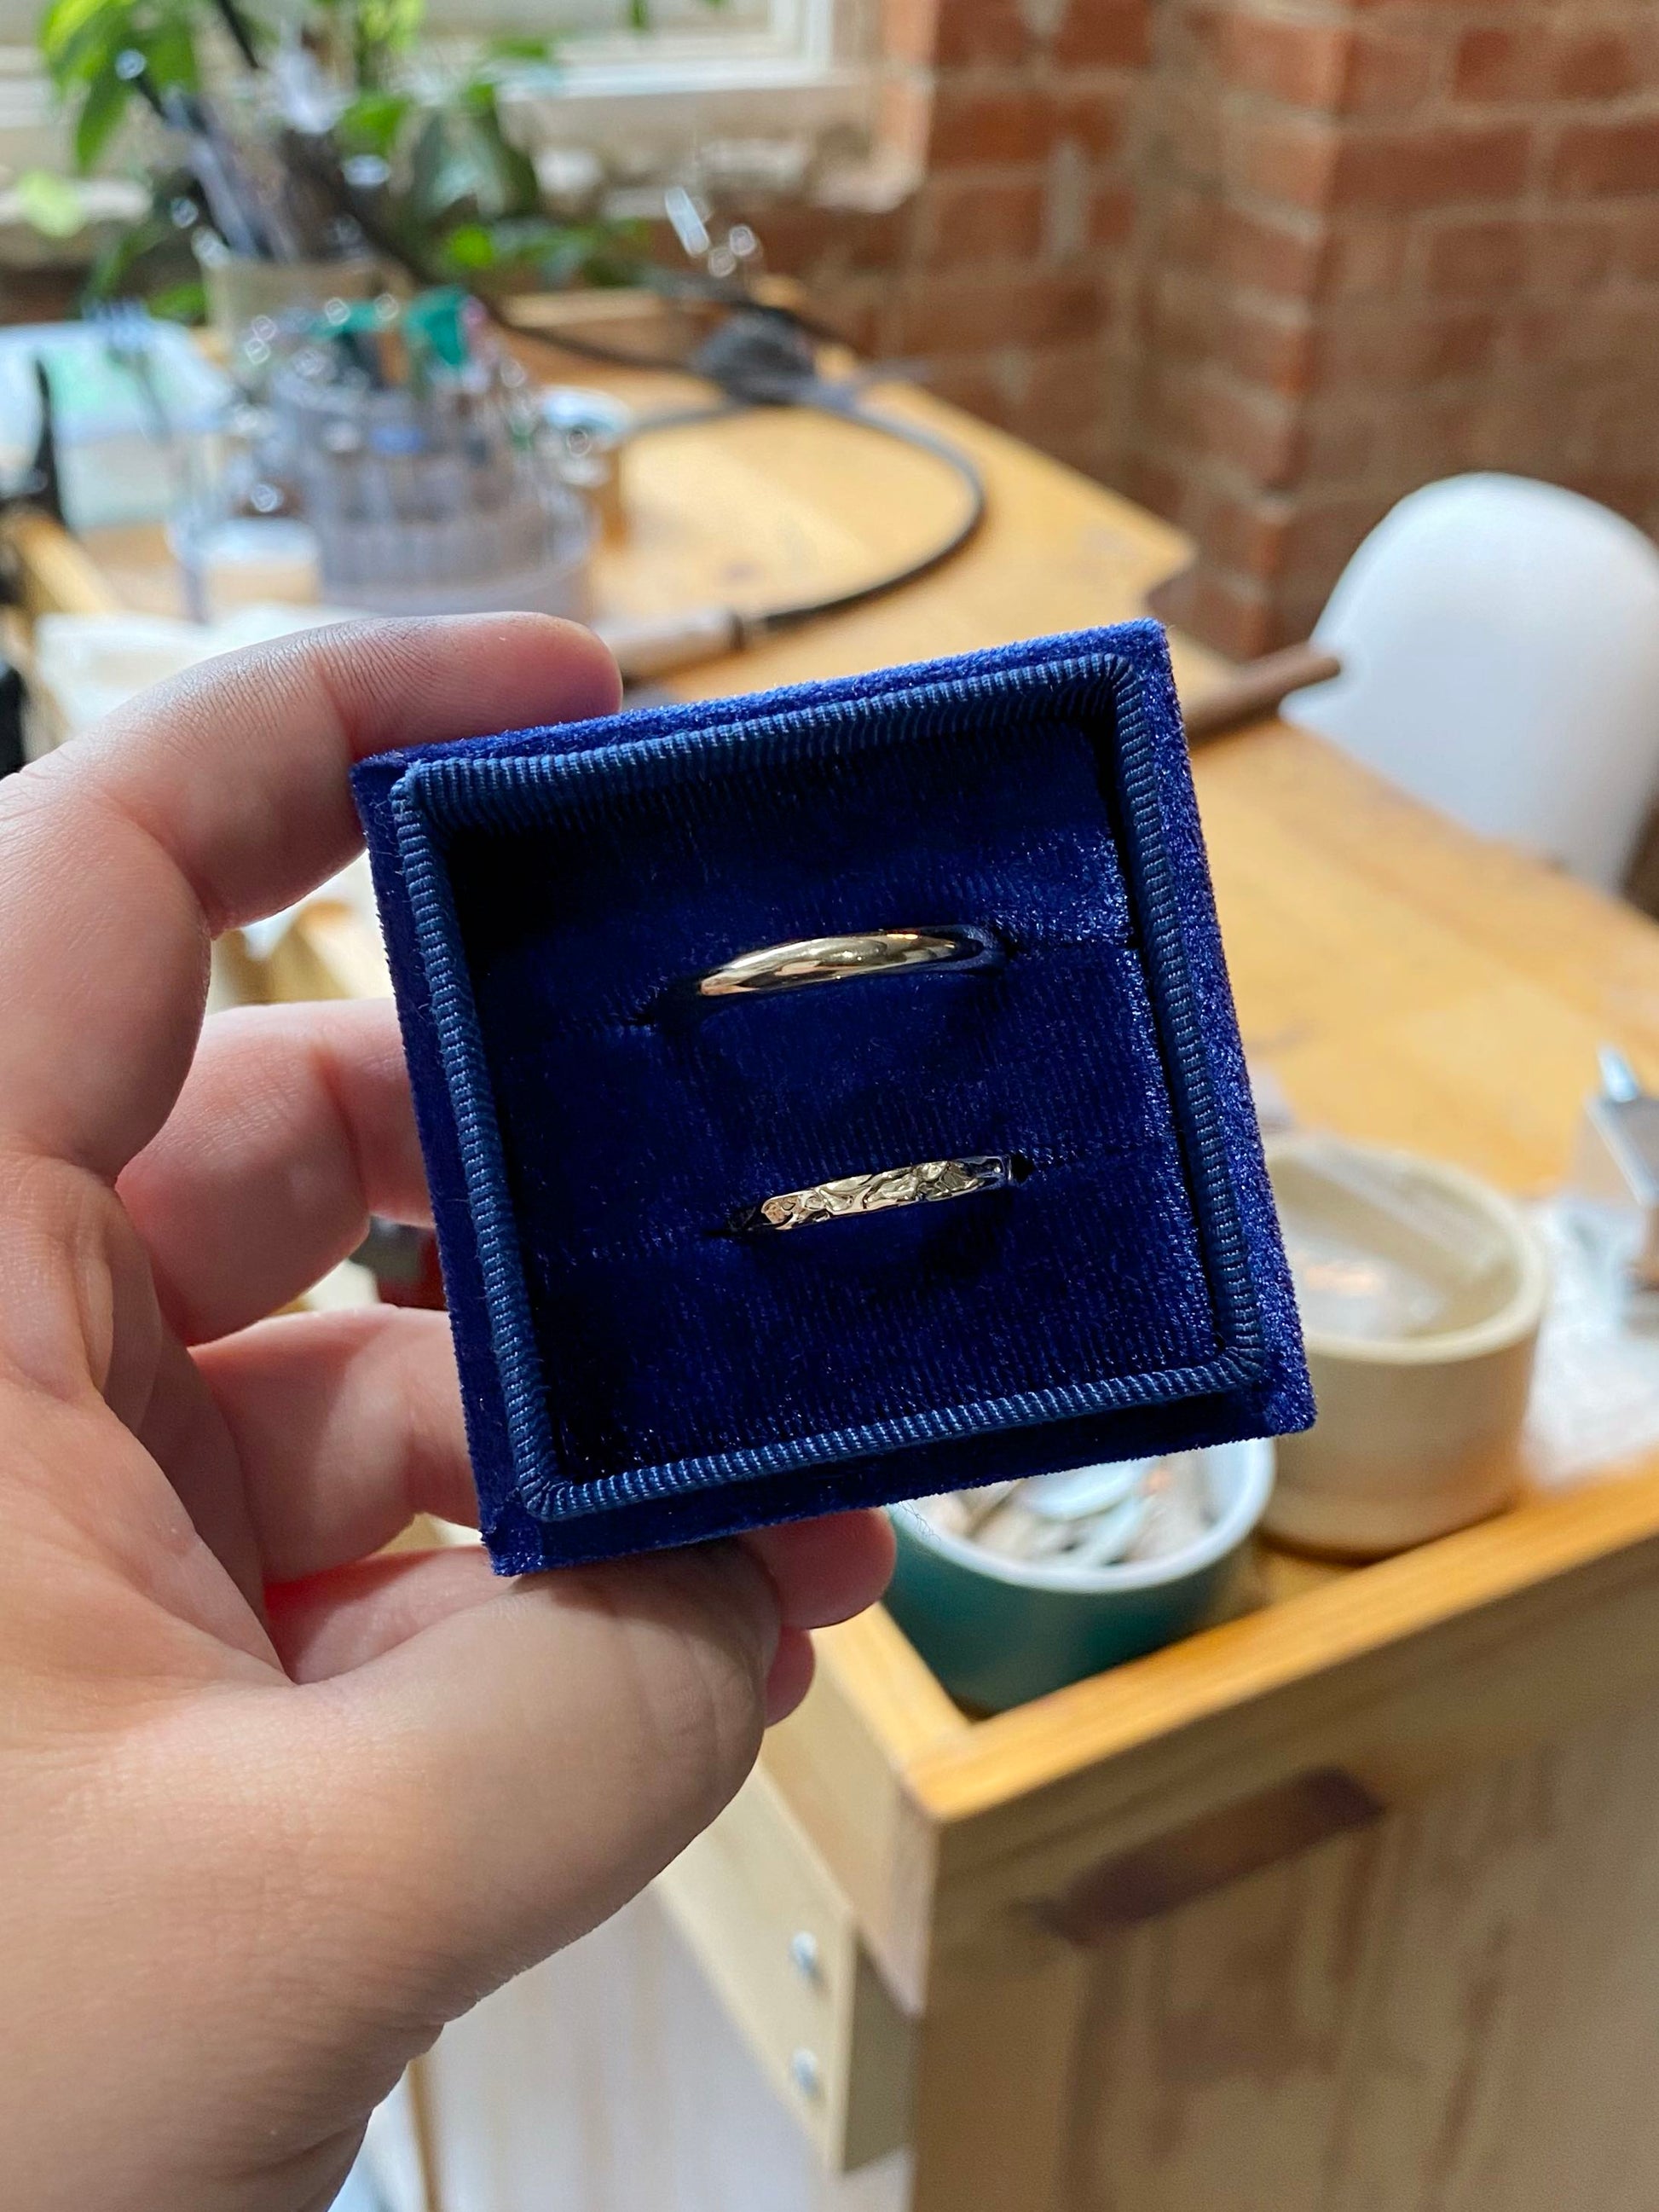 Two wedding rings in a blue box in front of jewellery work table